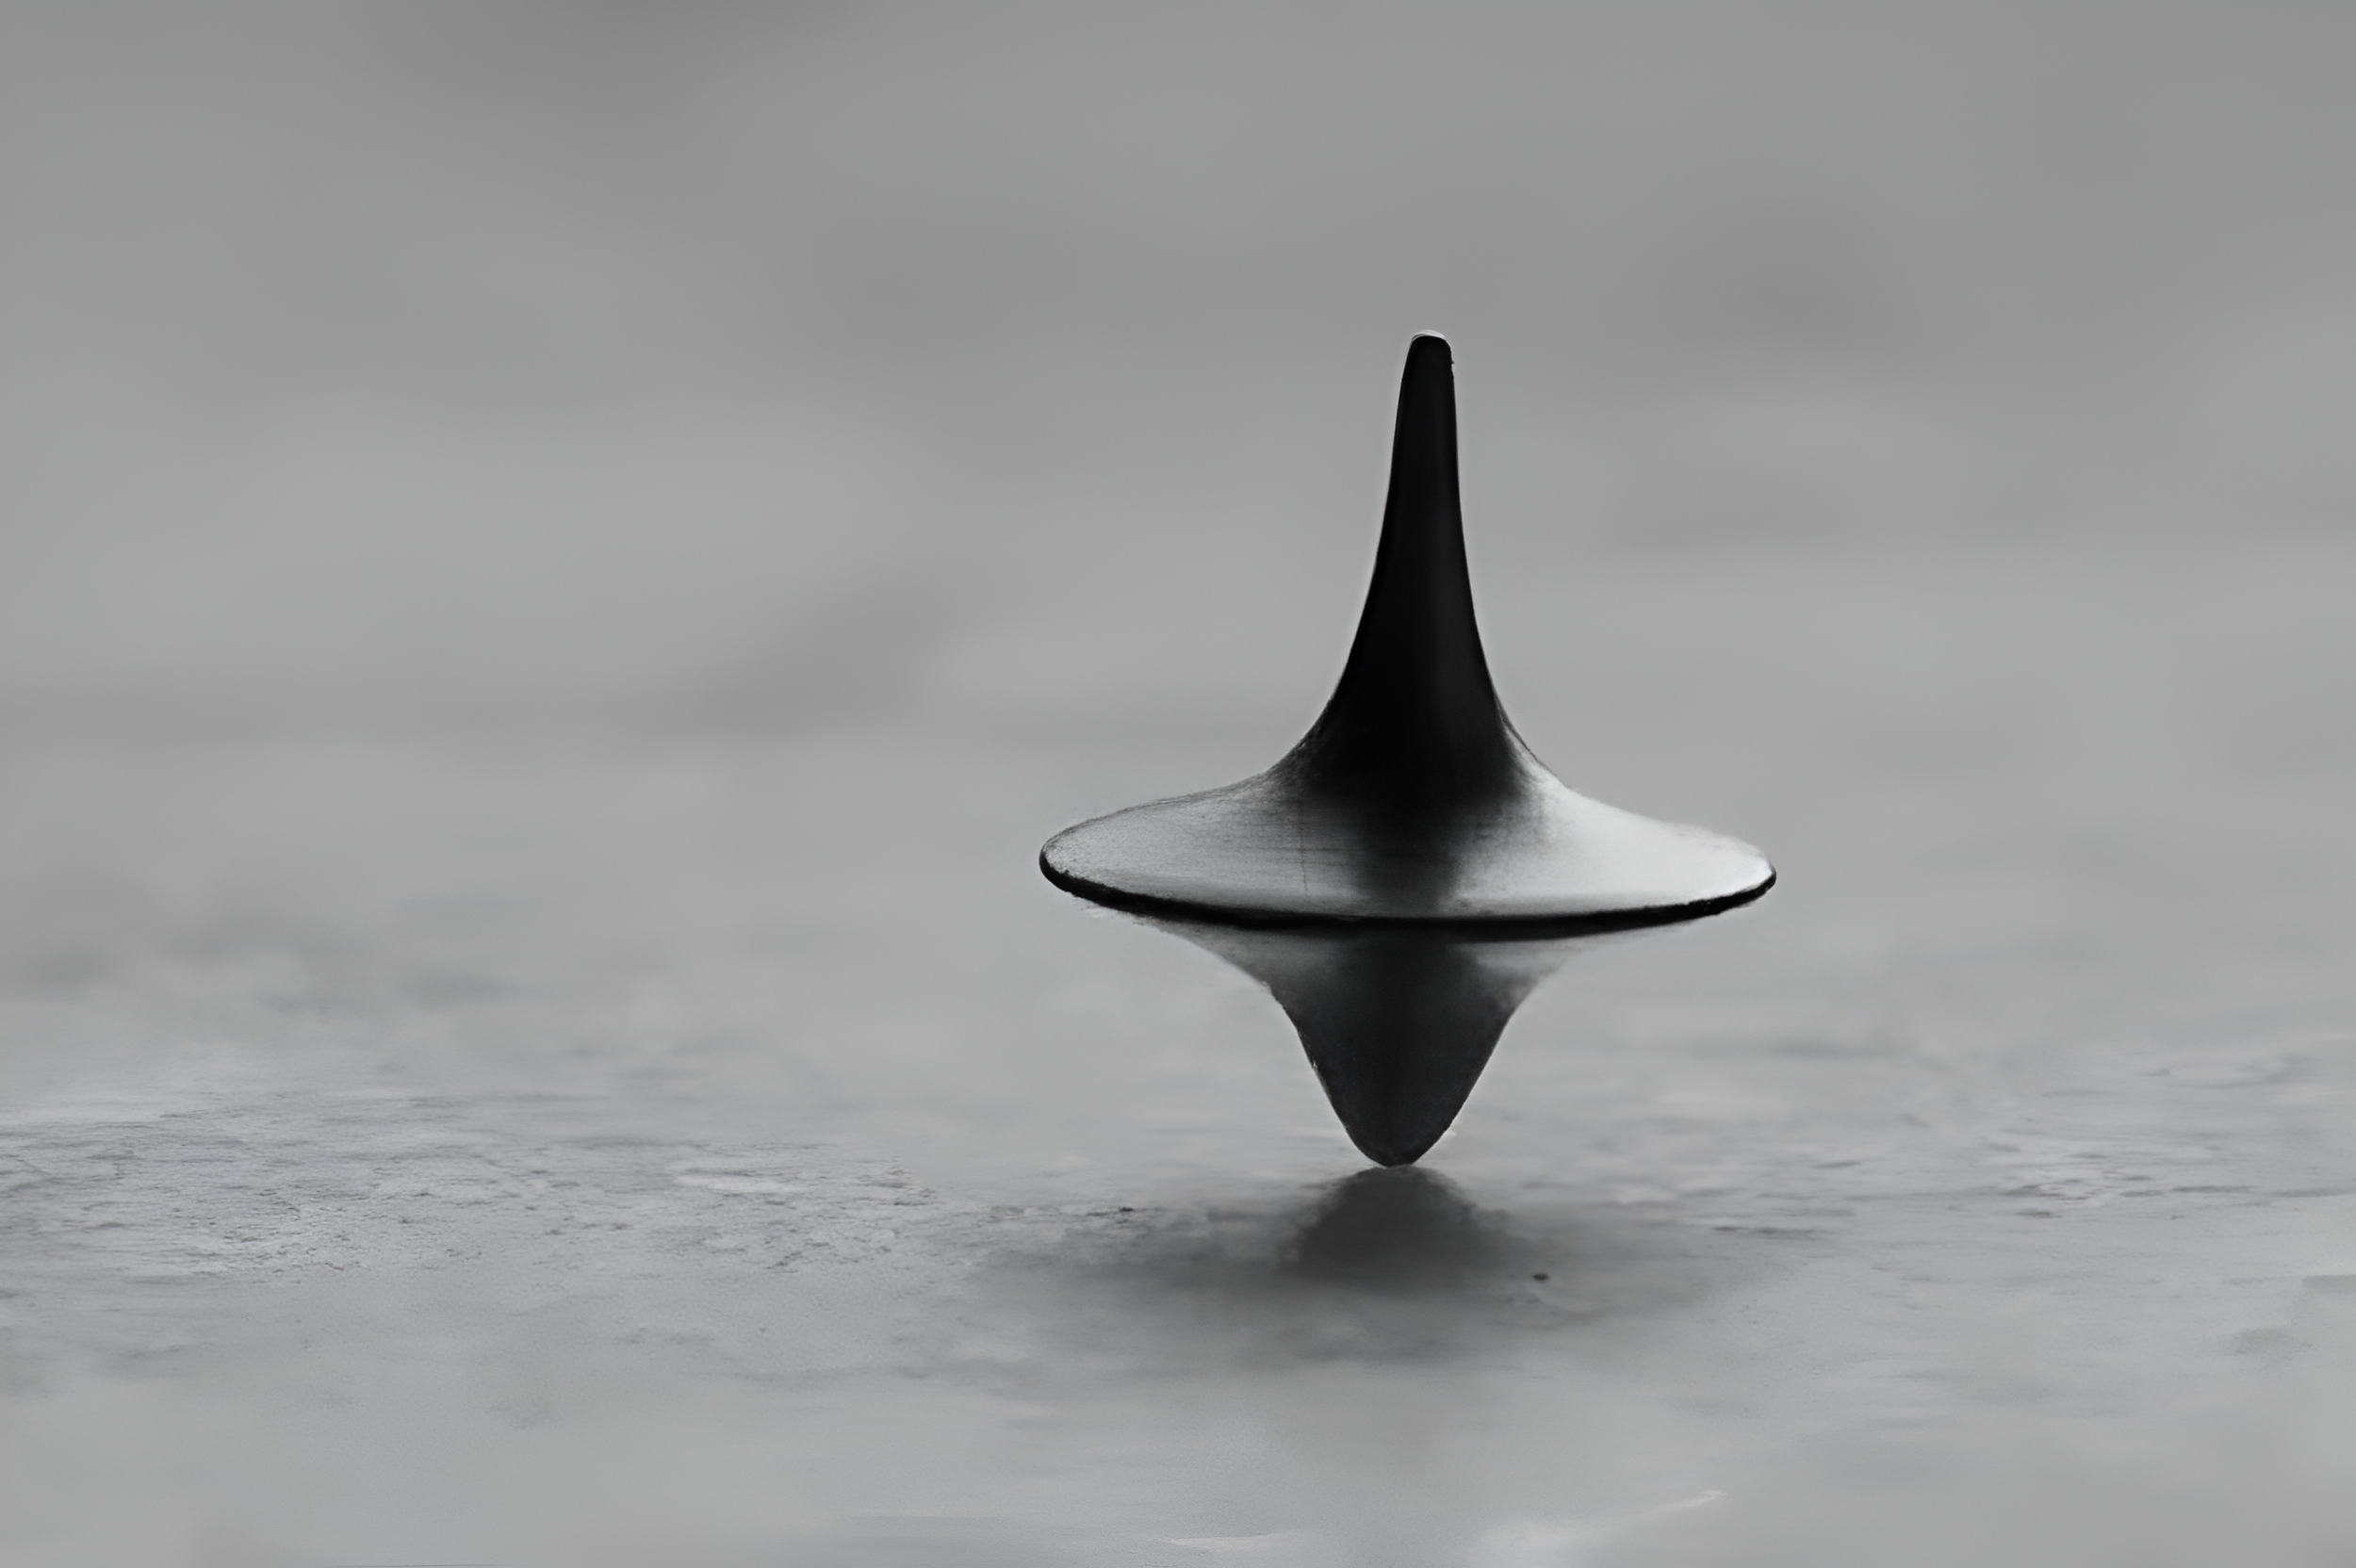 a spinning top referencing the movie inception